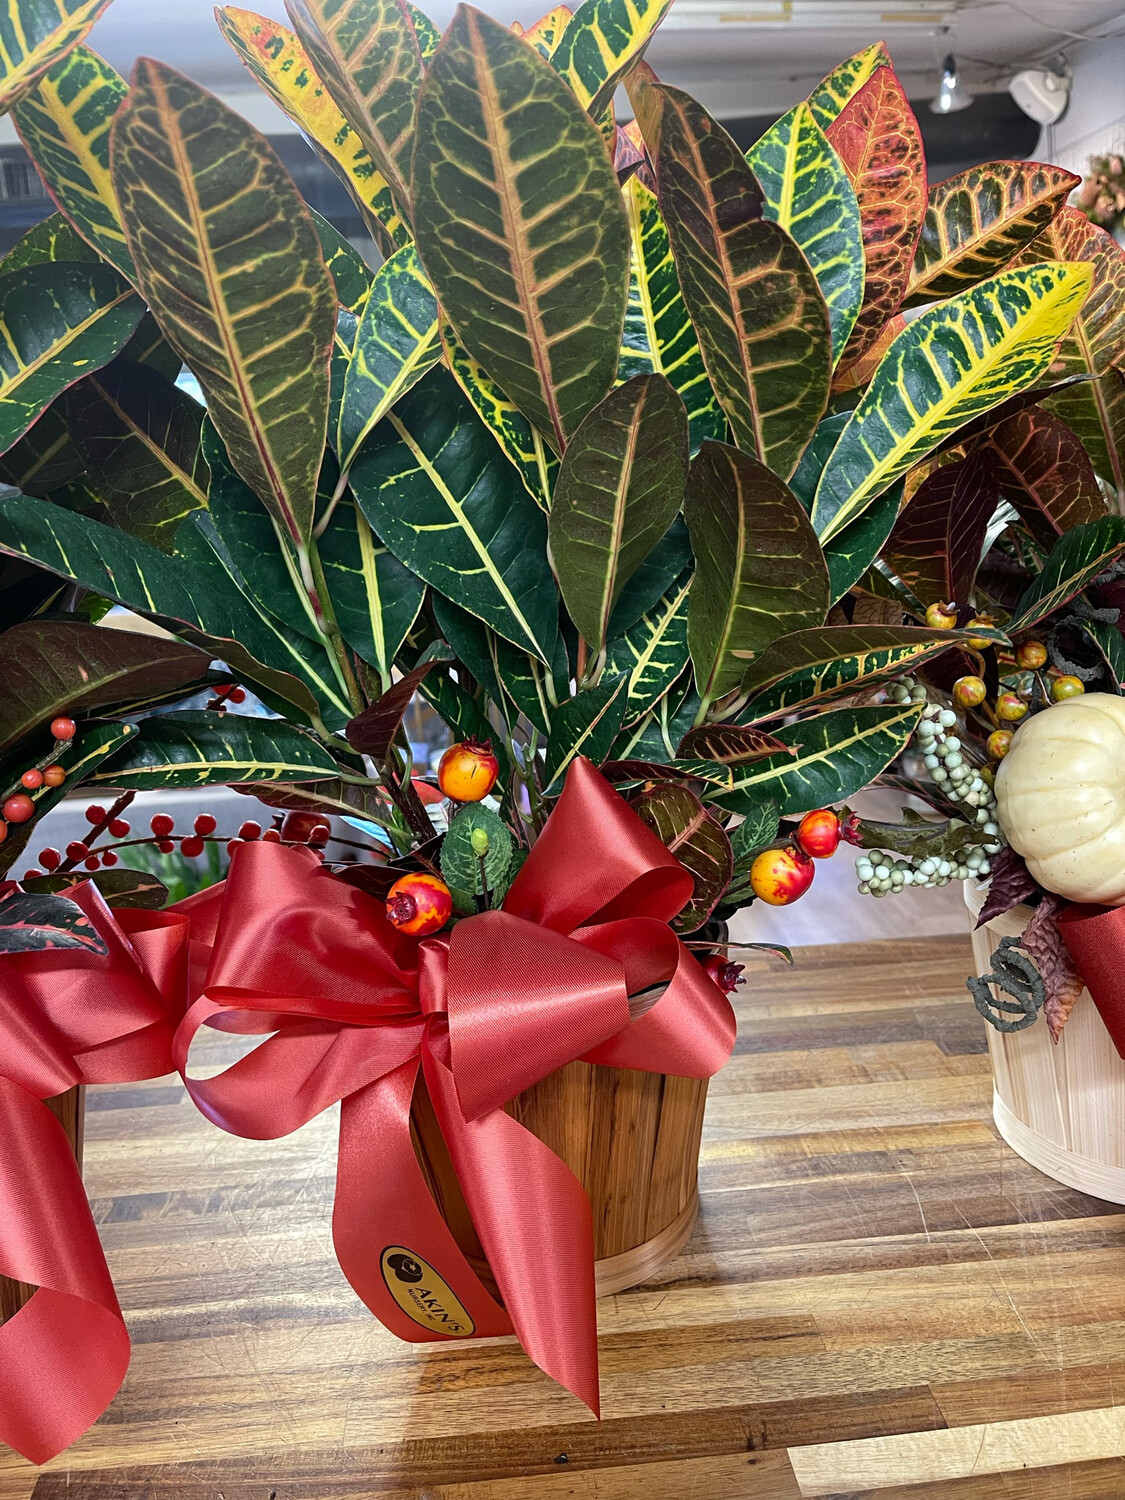 Premium Croton - With Bow And A Basket